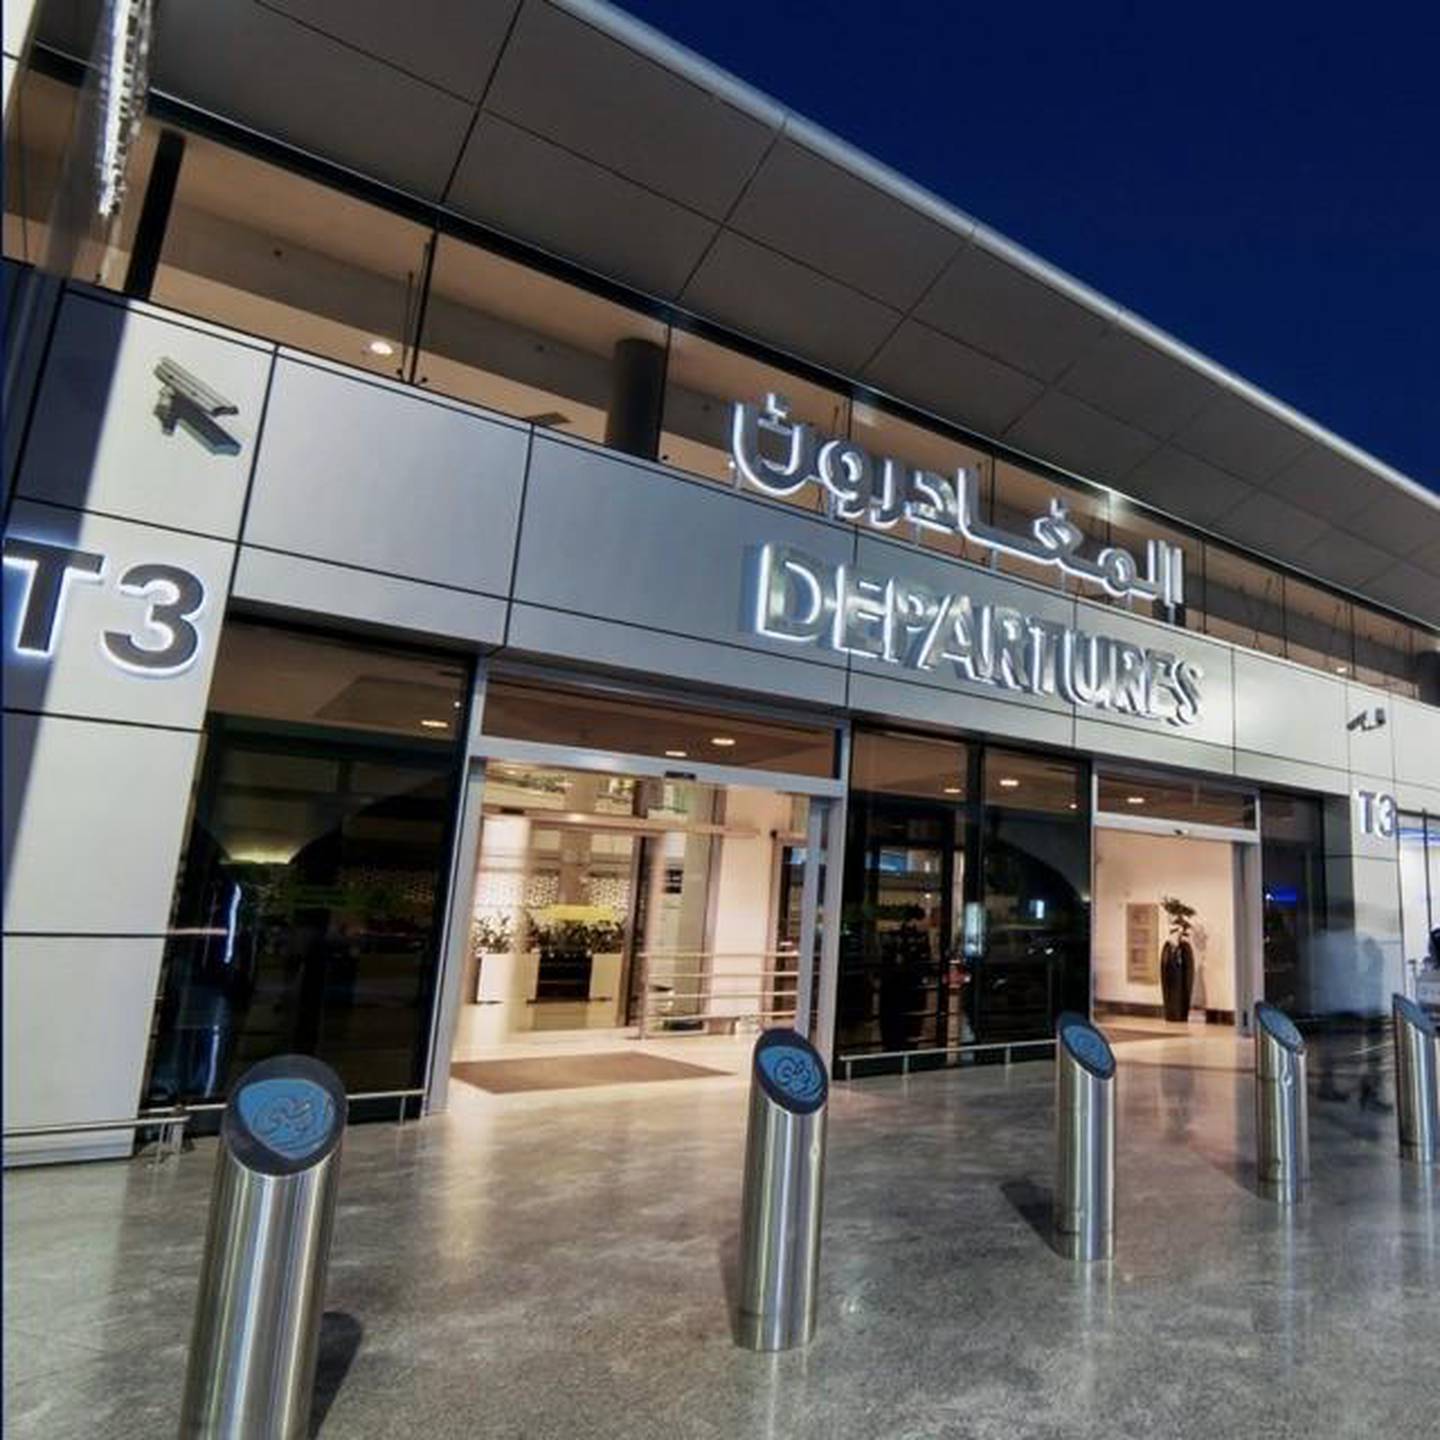 UAE residents can now fly into Abu Dhabi airport without waiting for permission to return. Courtesy Abu Dhabi airports